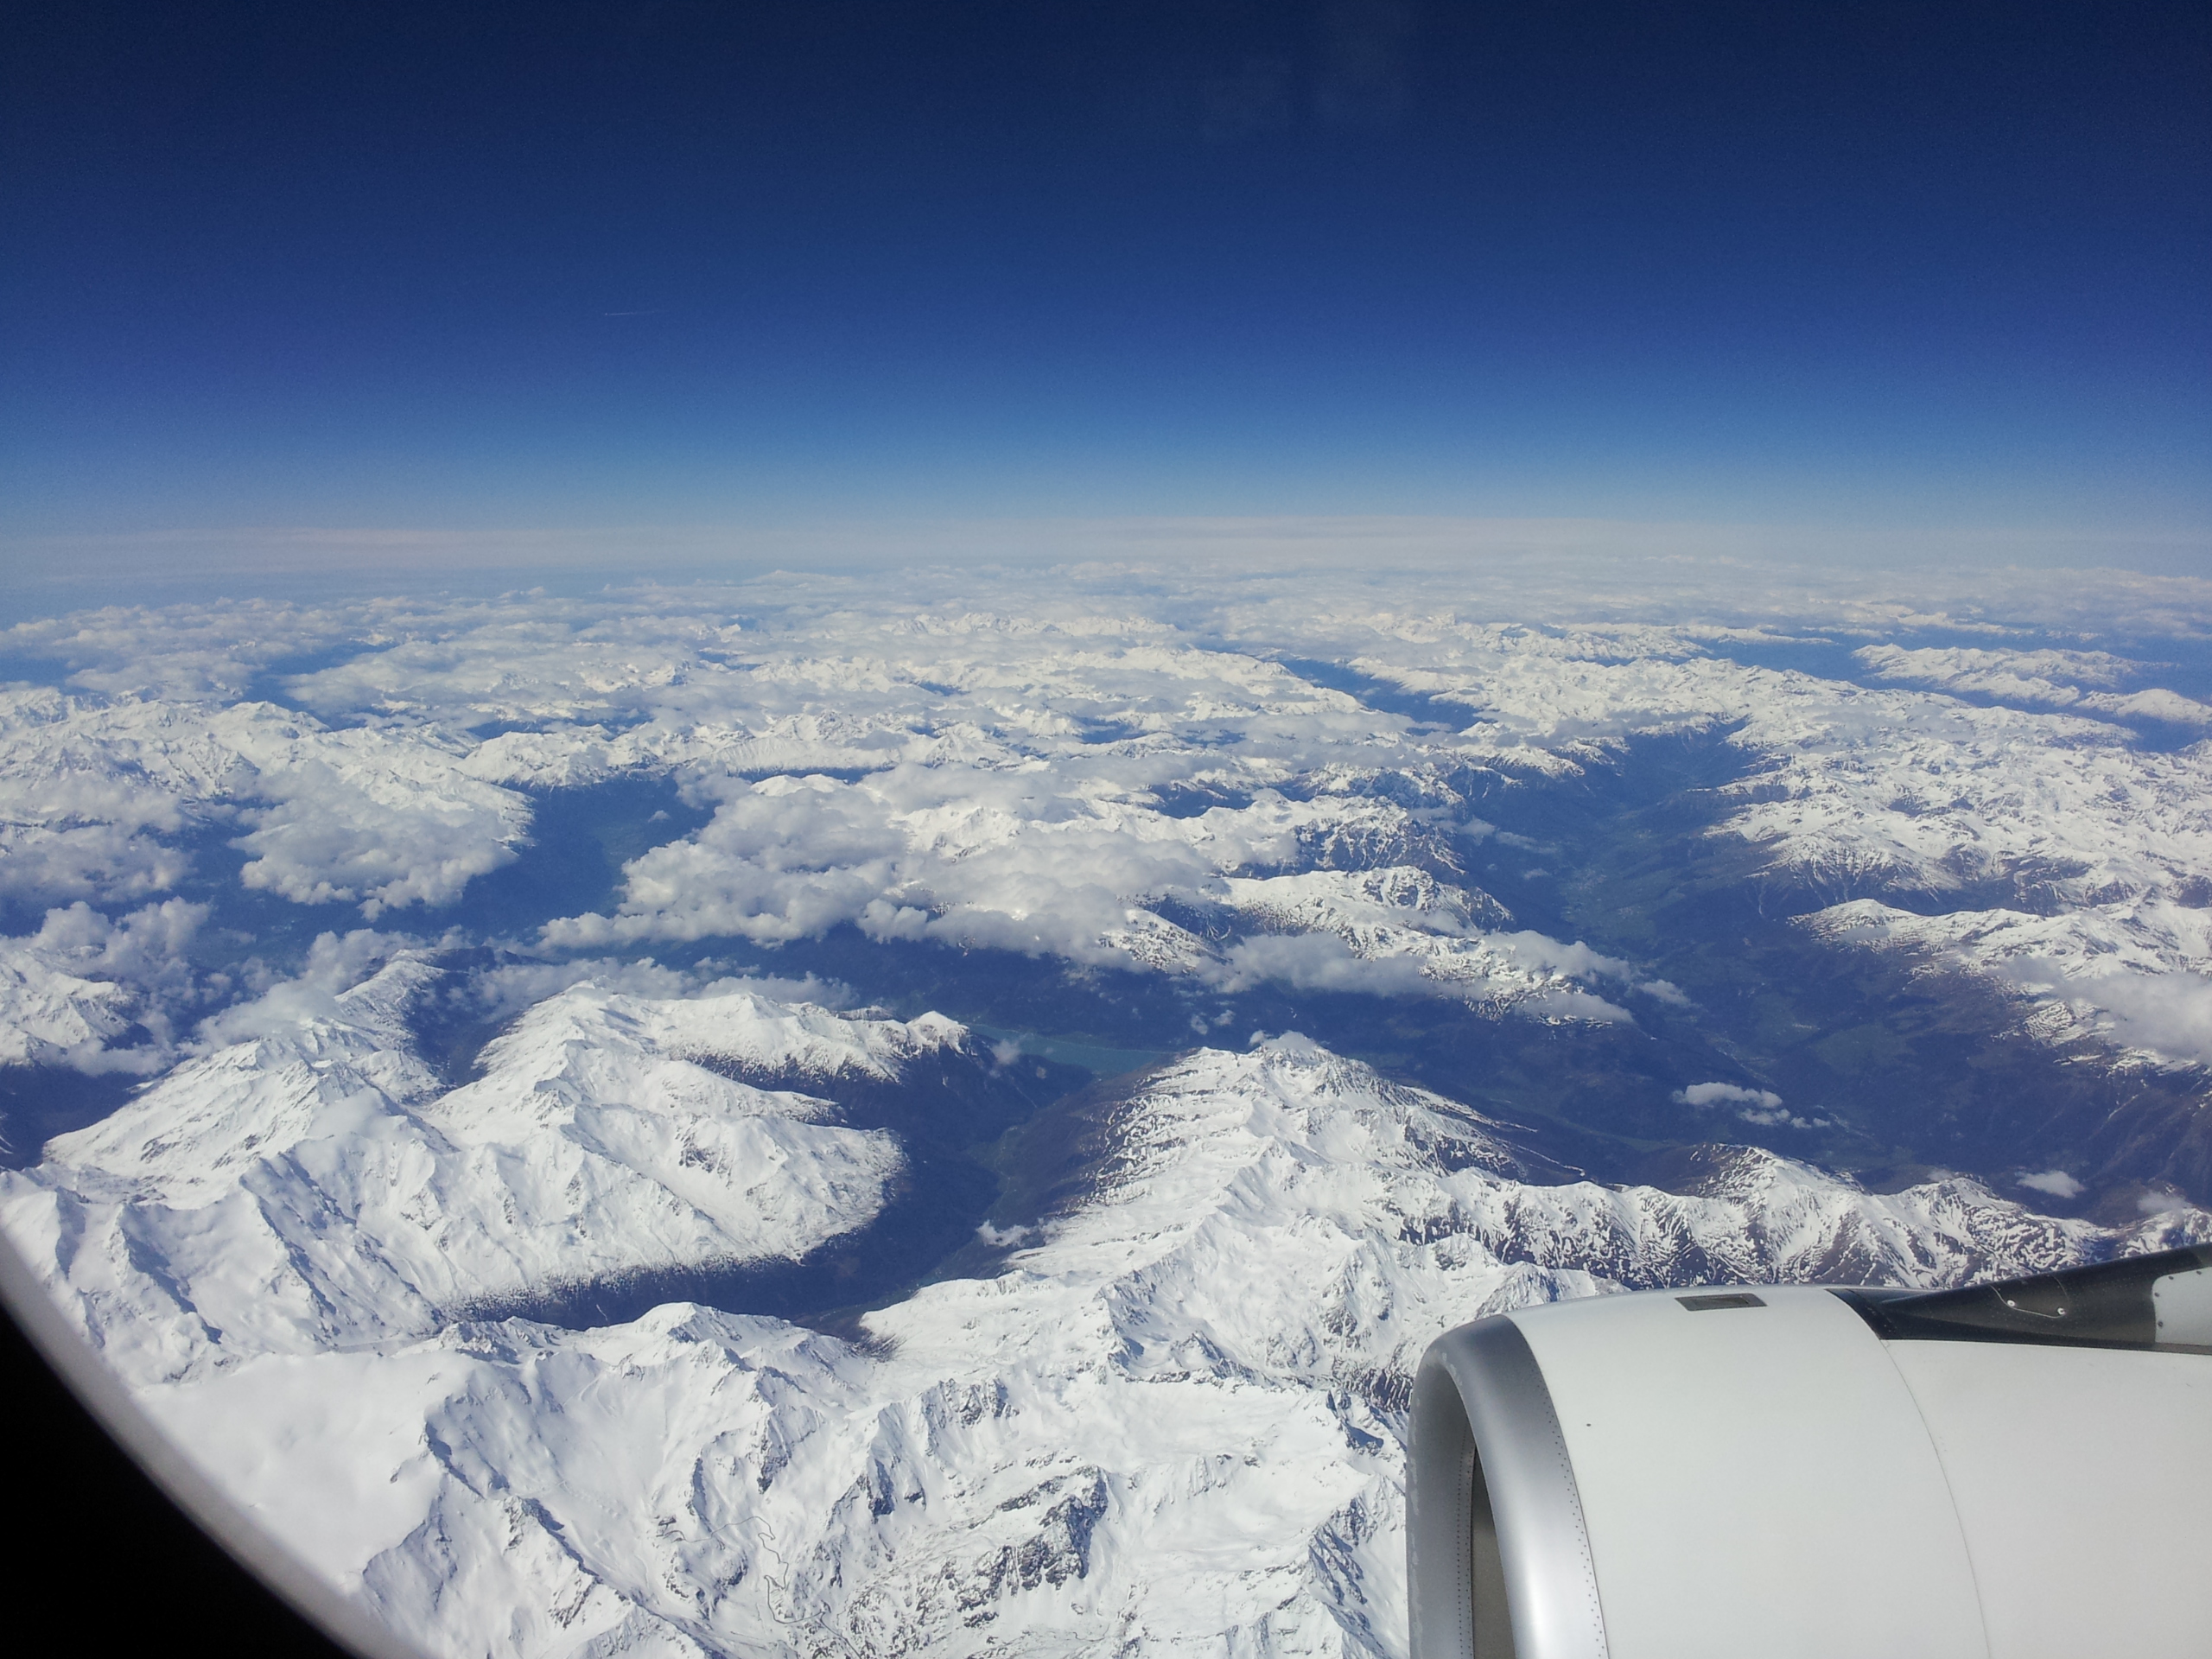 We head south over the Alps toward the Adriatic Sea on the way to Tel Aviv, Israel.